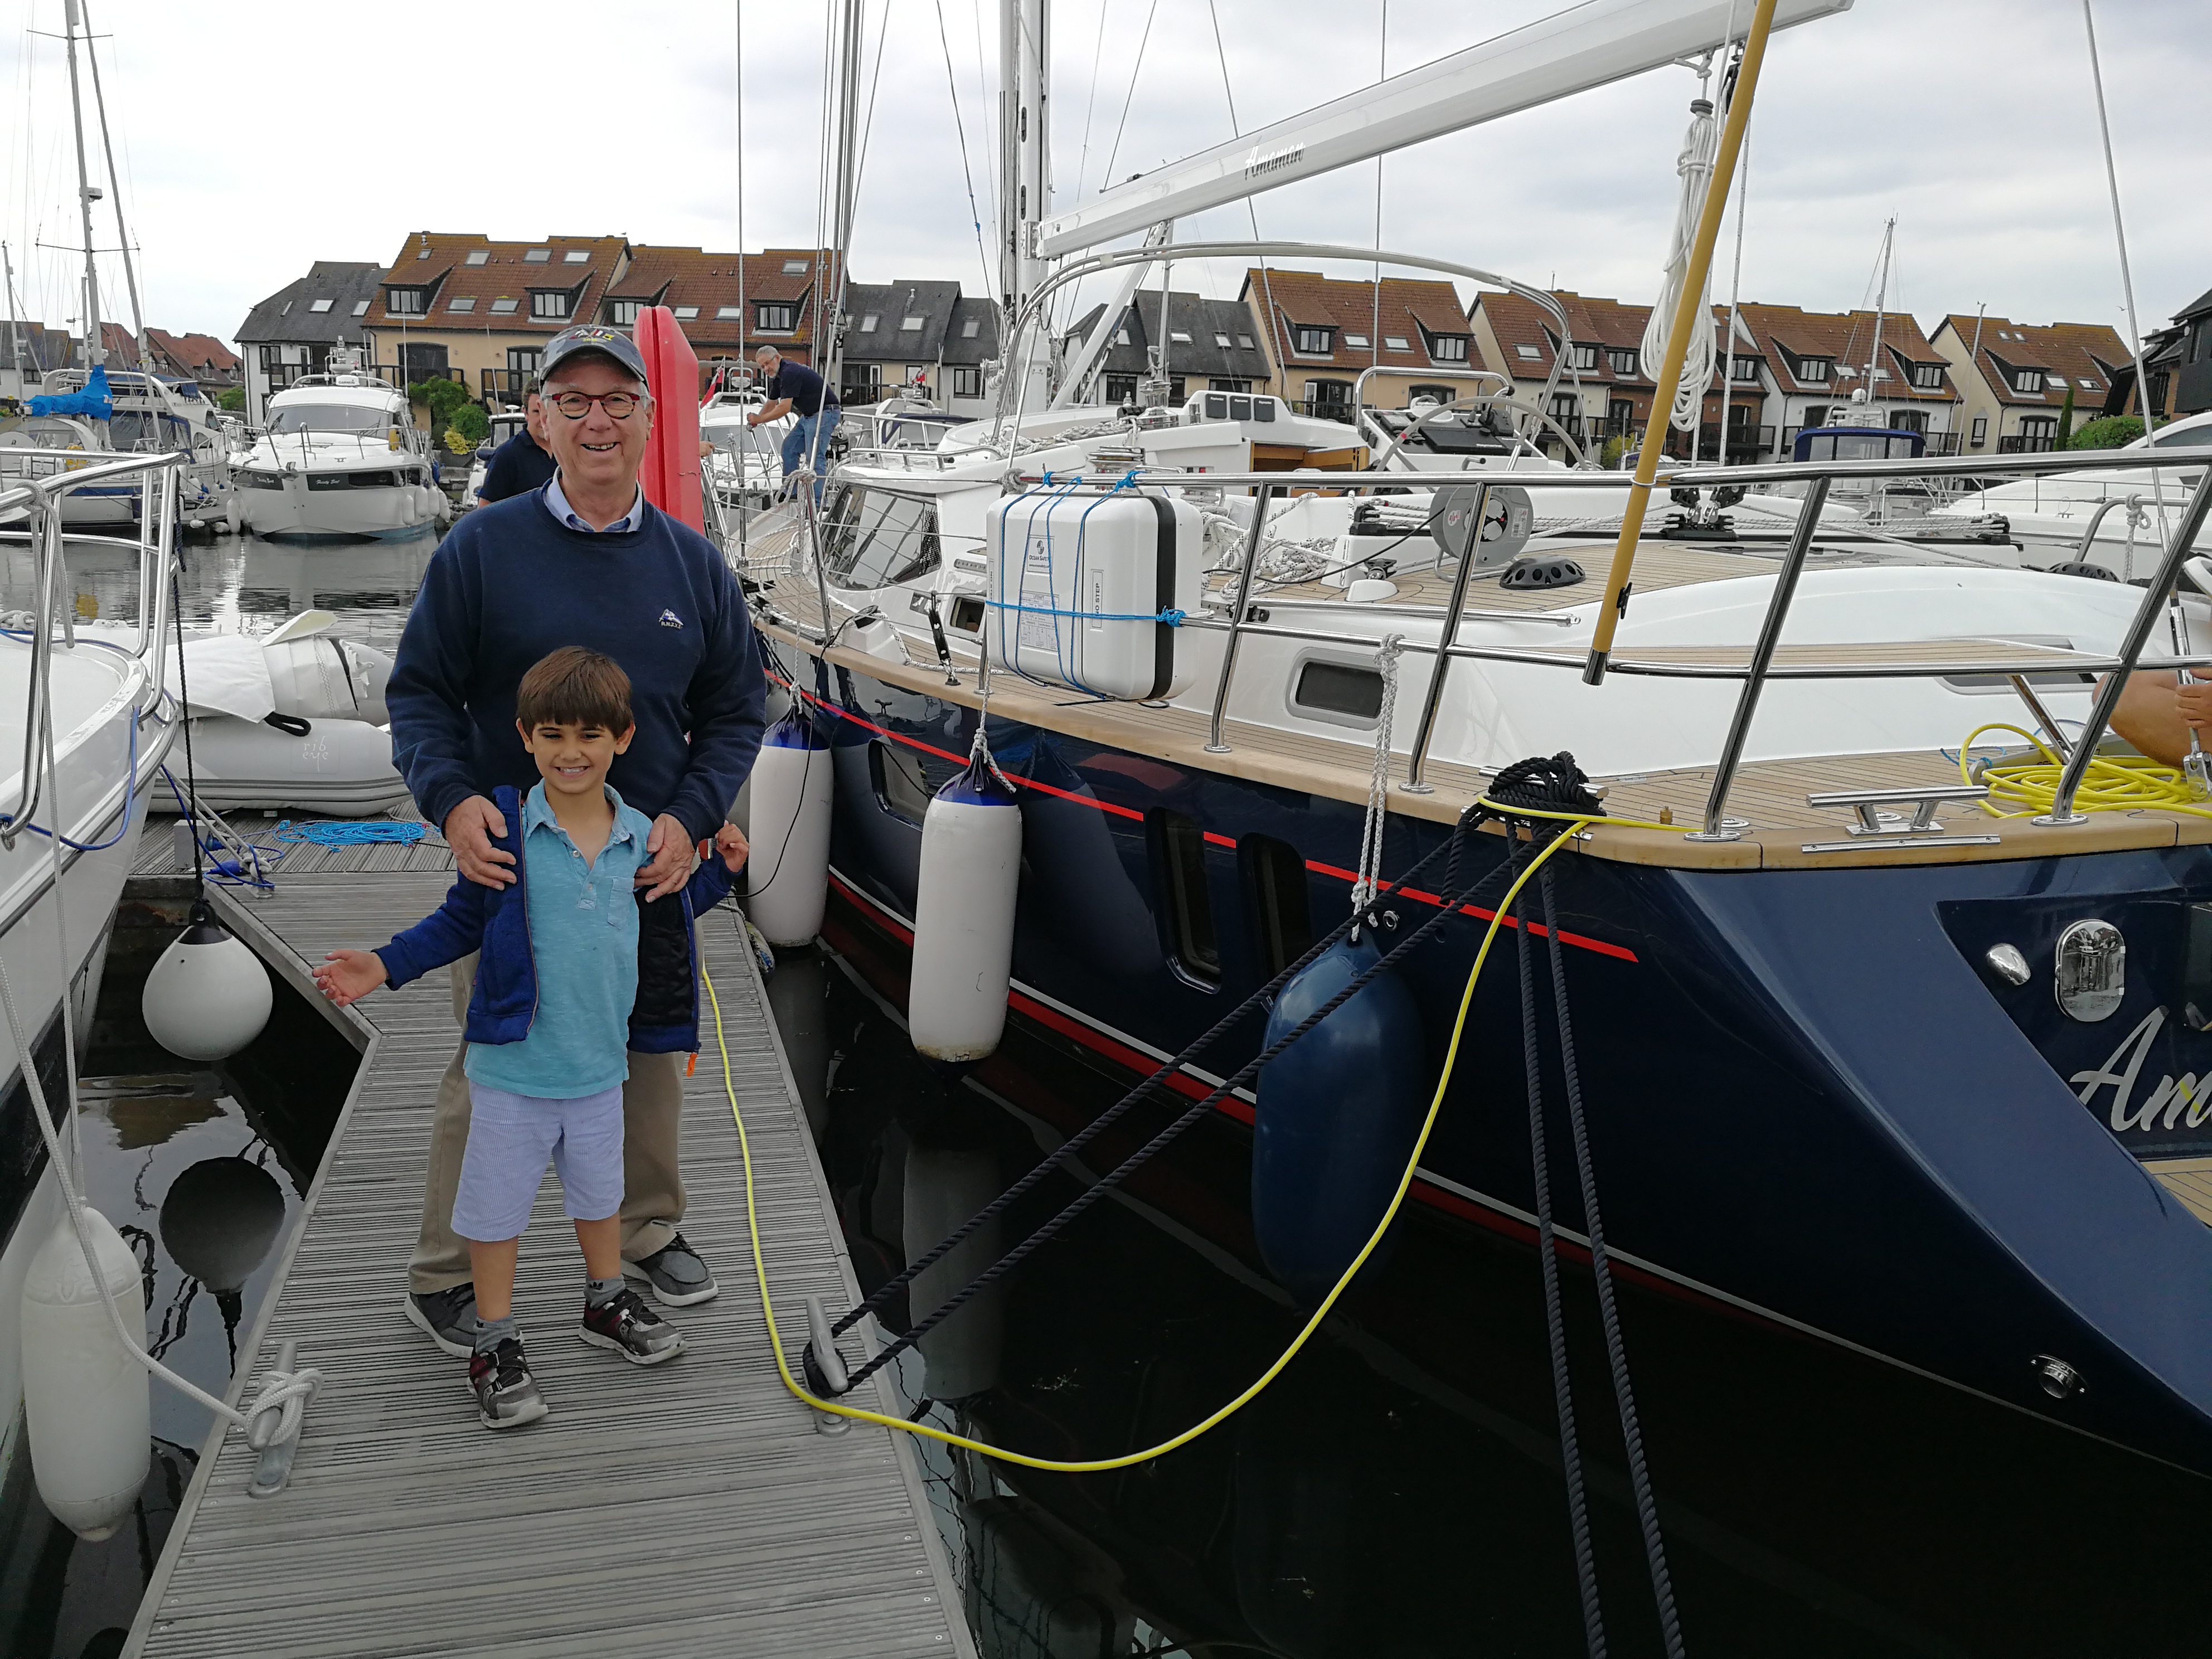 At Discovery Yachts boat yard Southampton UK, Ron Holland and Chayten Anand are checking out the ships